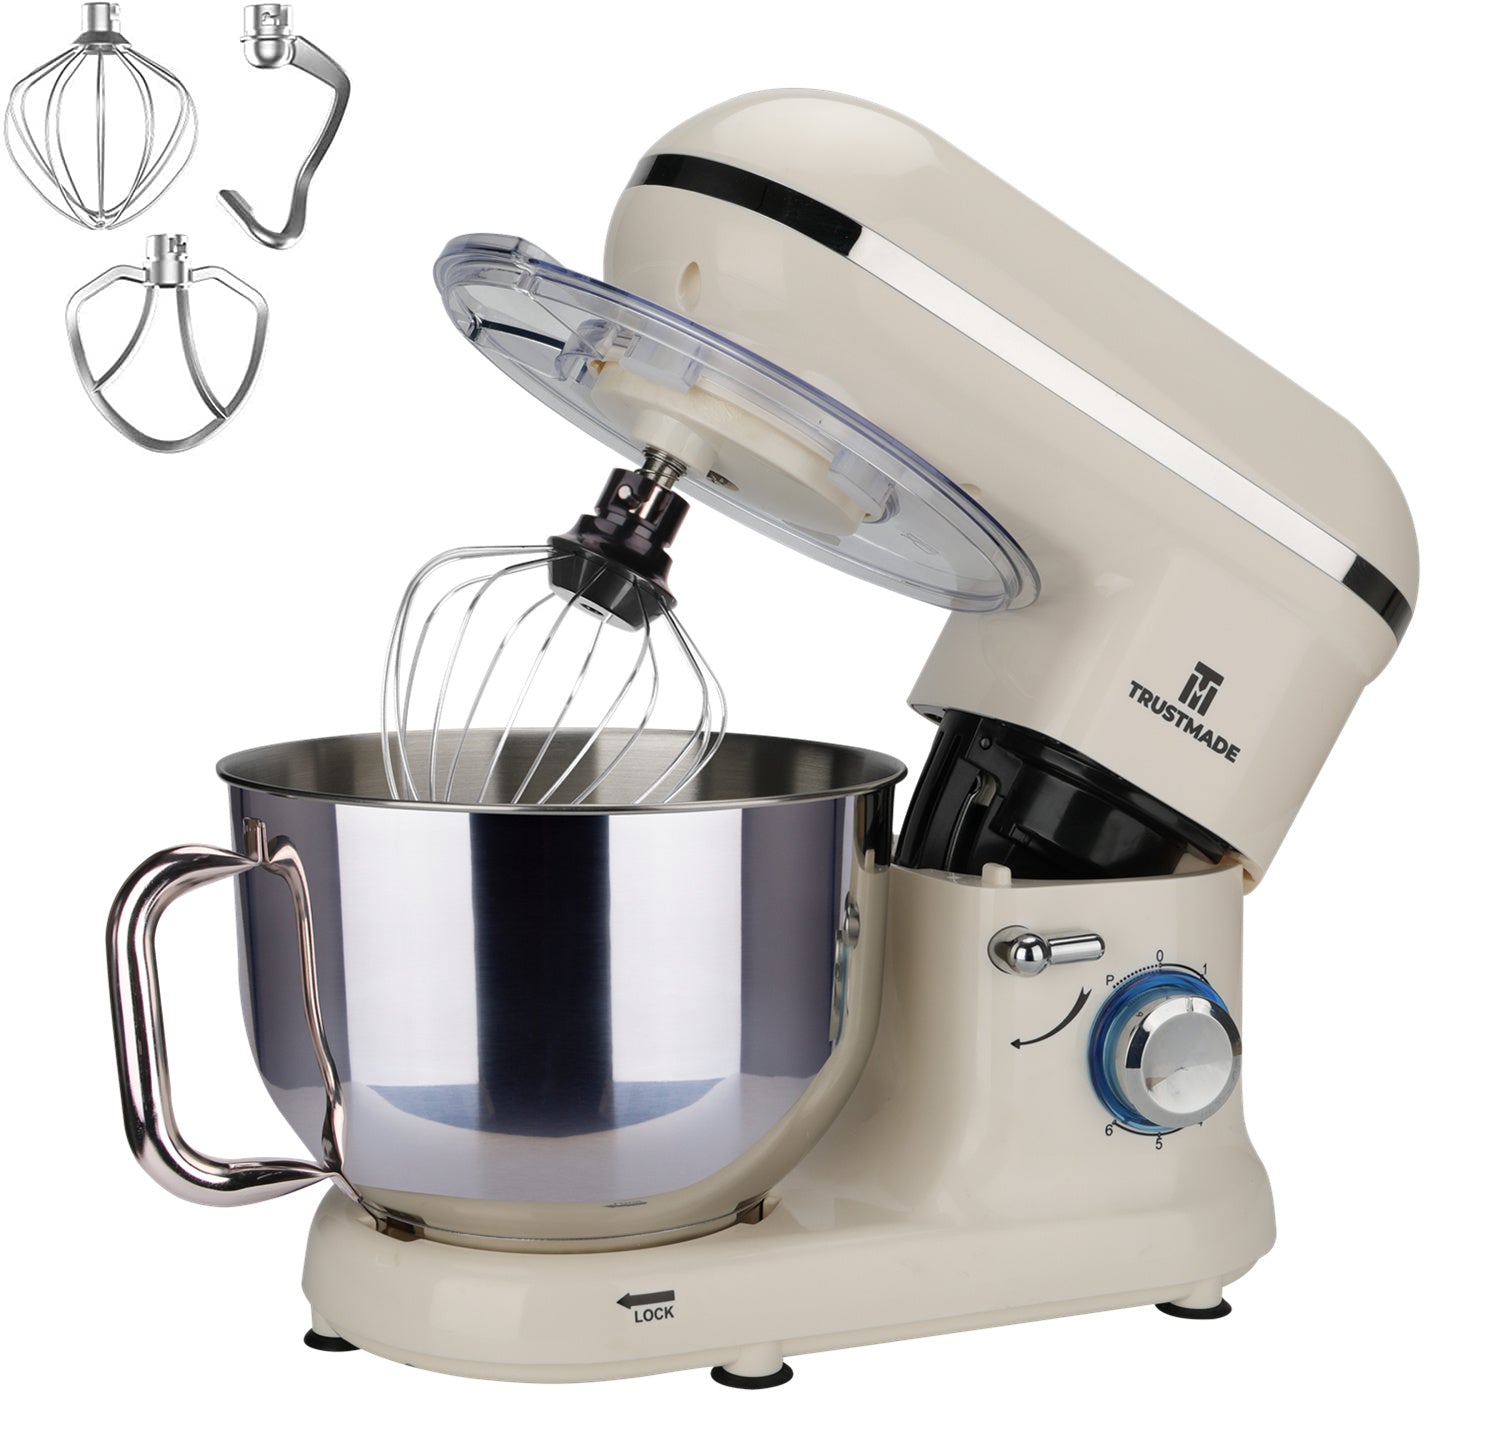 5.8QT 6 Speed Control Electric Stand Mixer with Stainless Steel Mixing Bowl Food Mixer TRUSTMADE